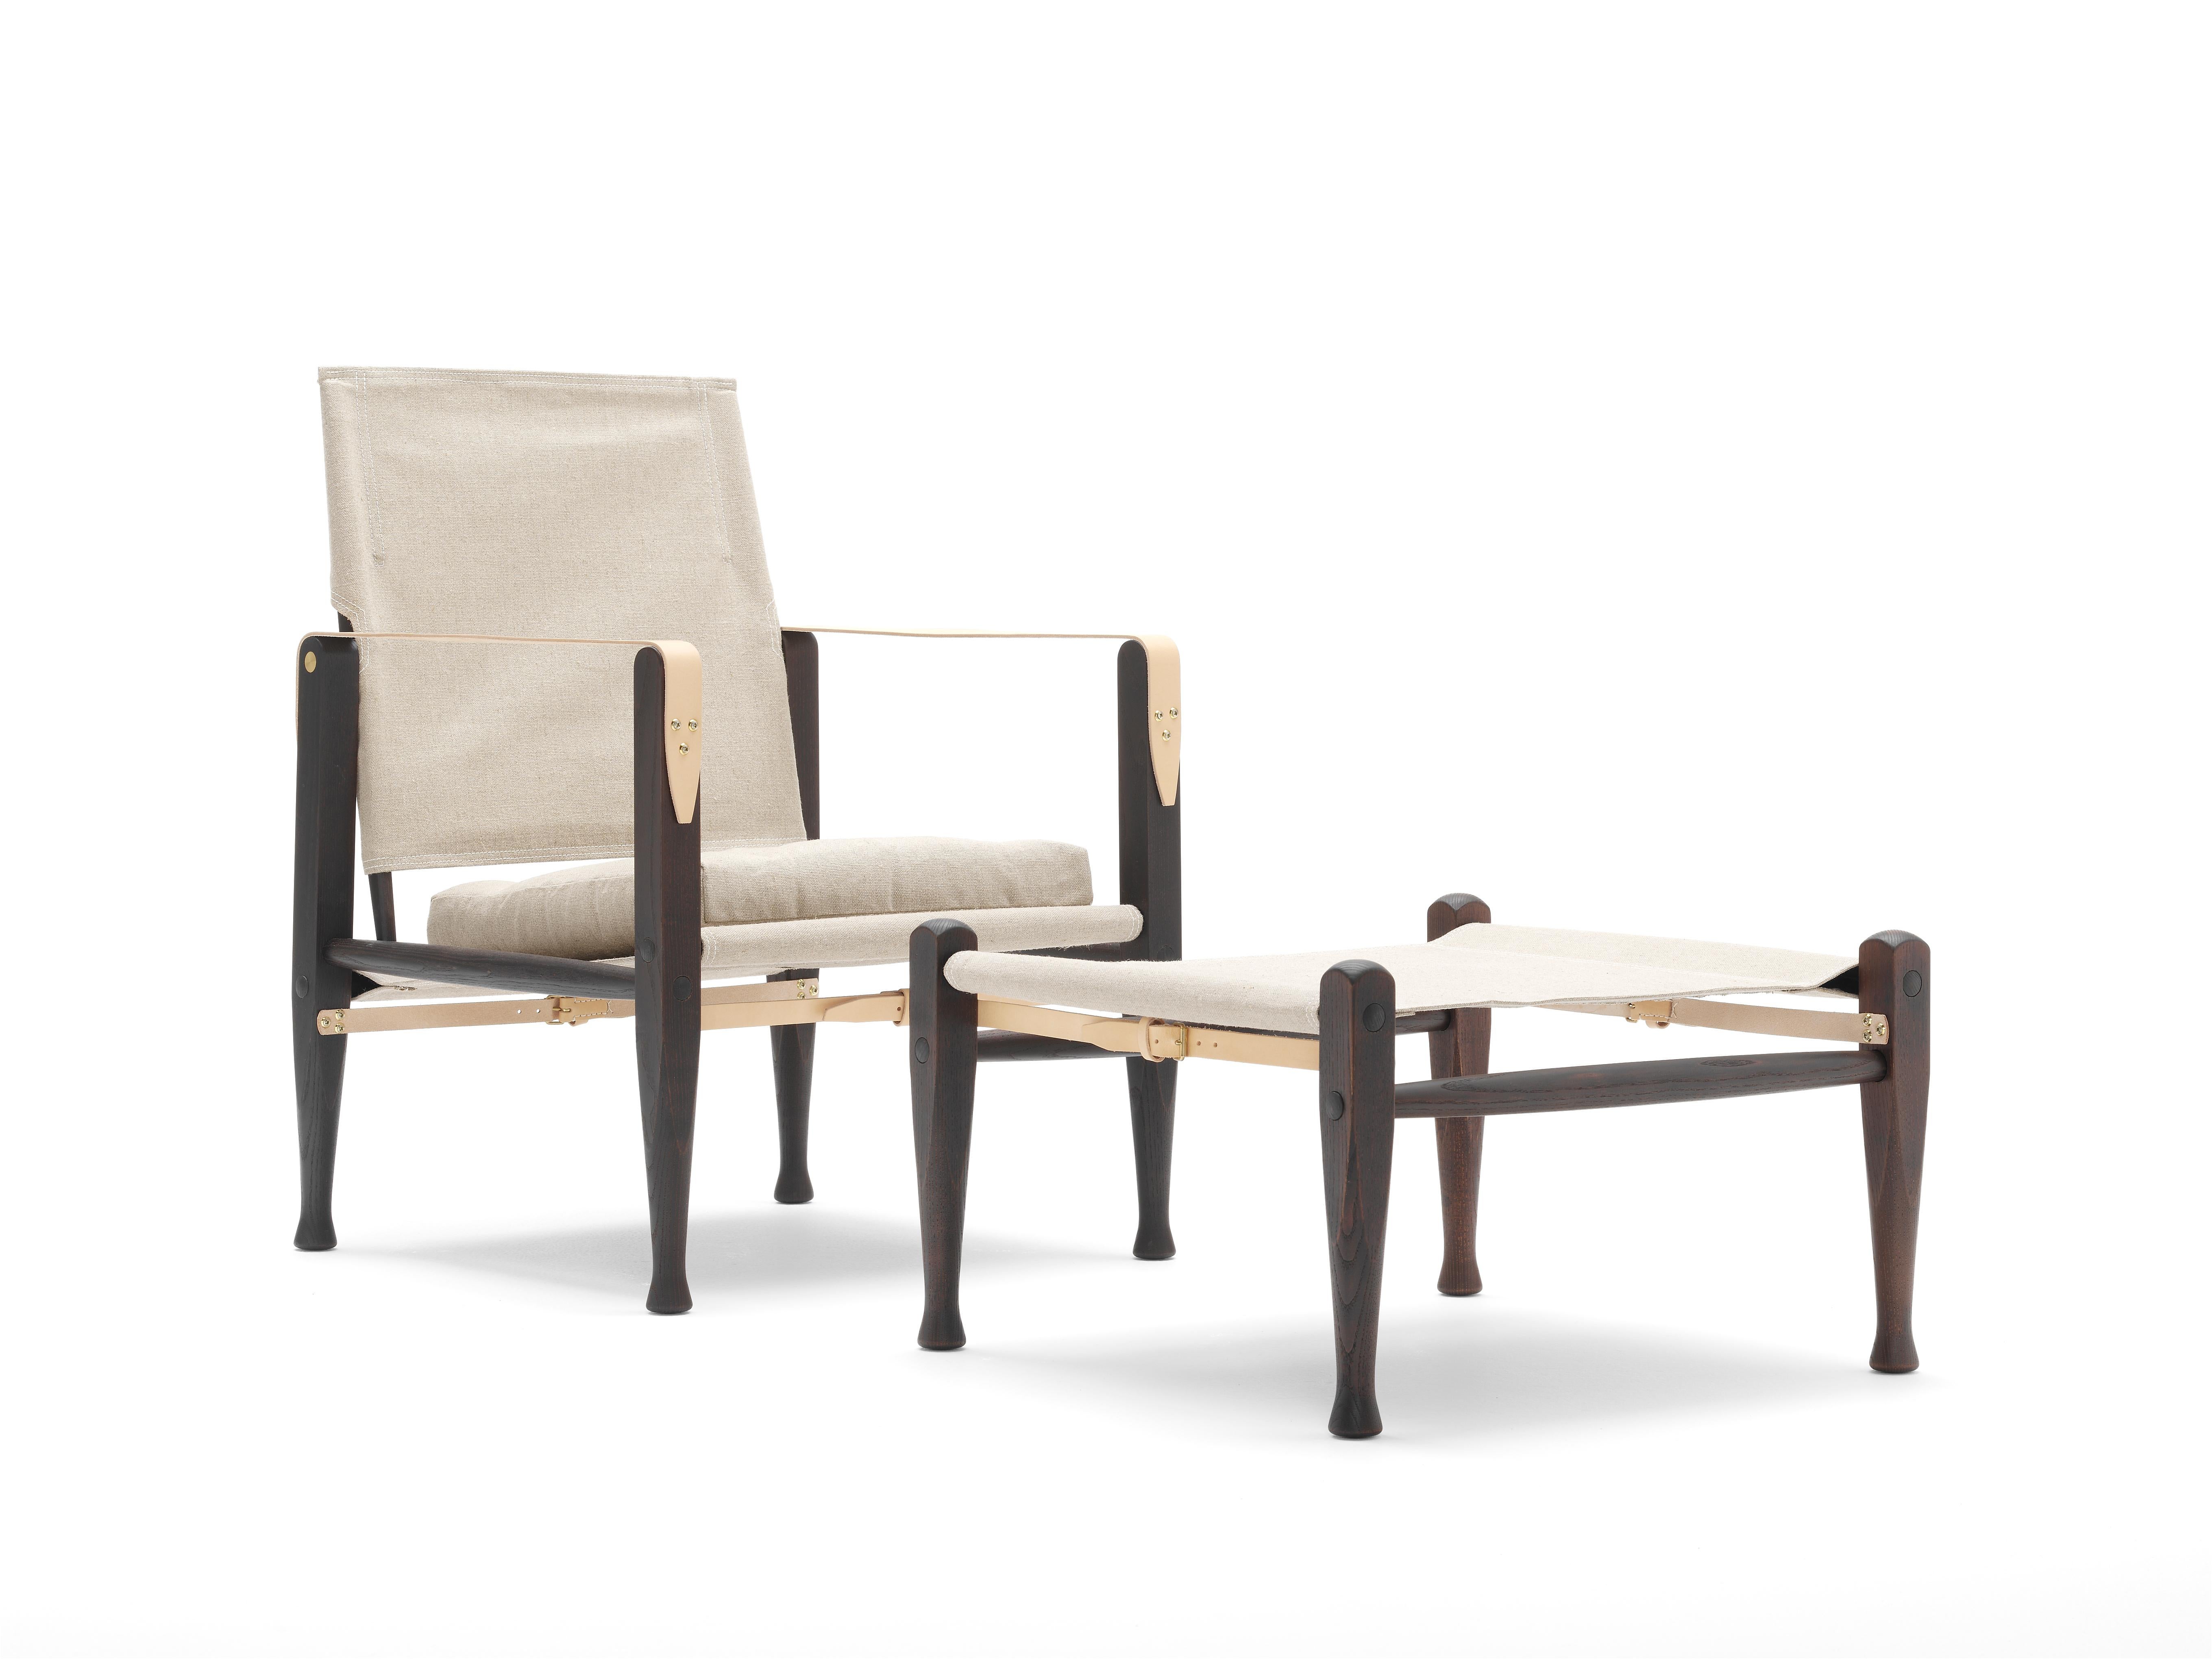 Contemporary KK47000 Safari Chair in Smoked Stain by Kaare Klint